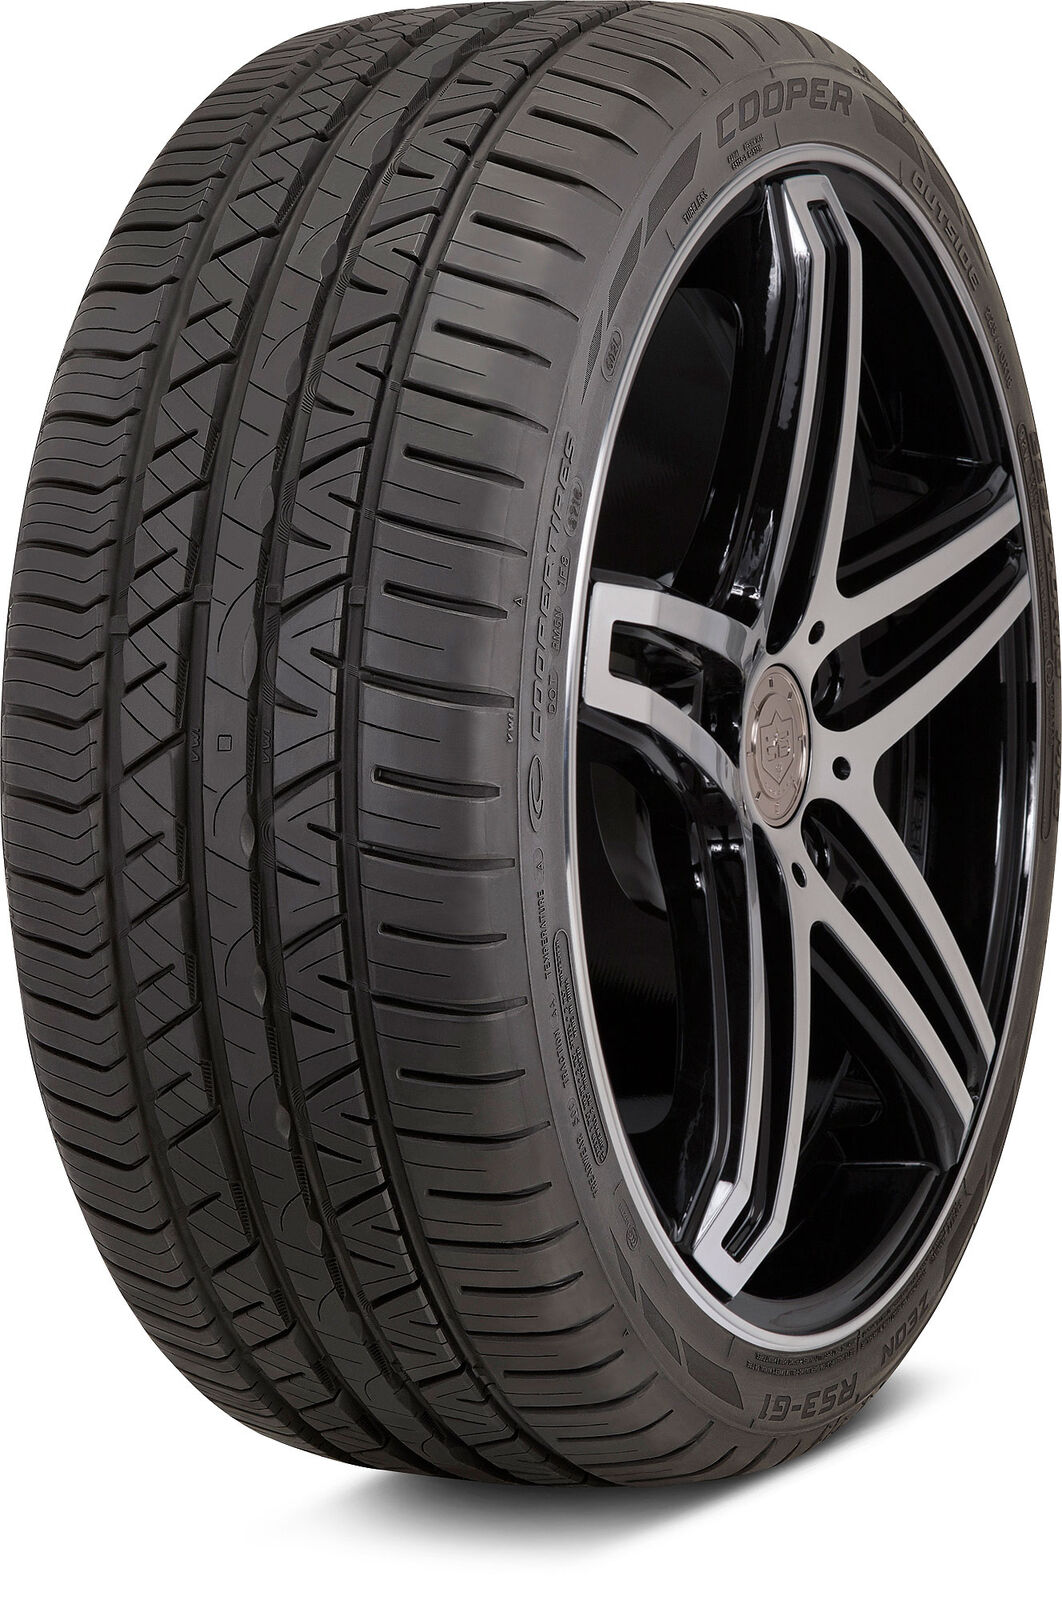 (Qty: 2) 305/35R20XL Cooper Zeon RS3-G1 107W tire